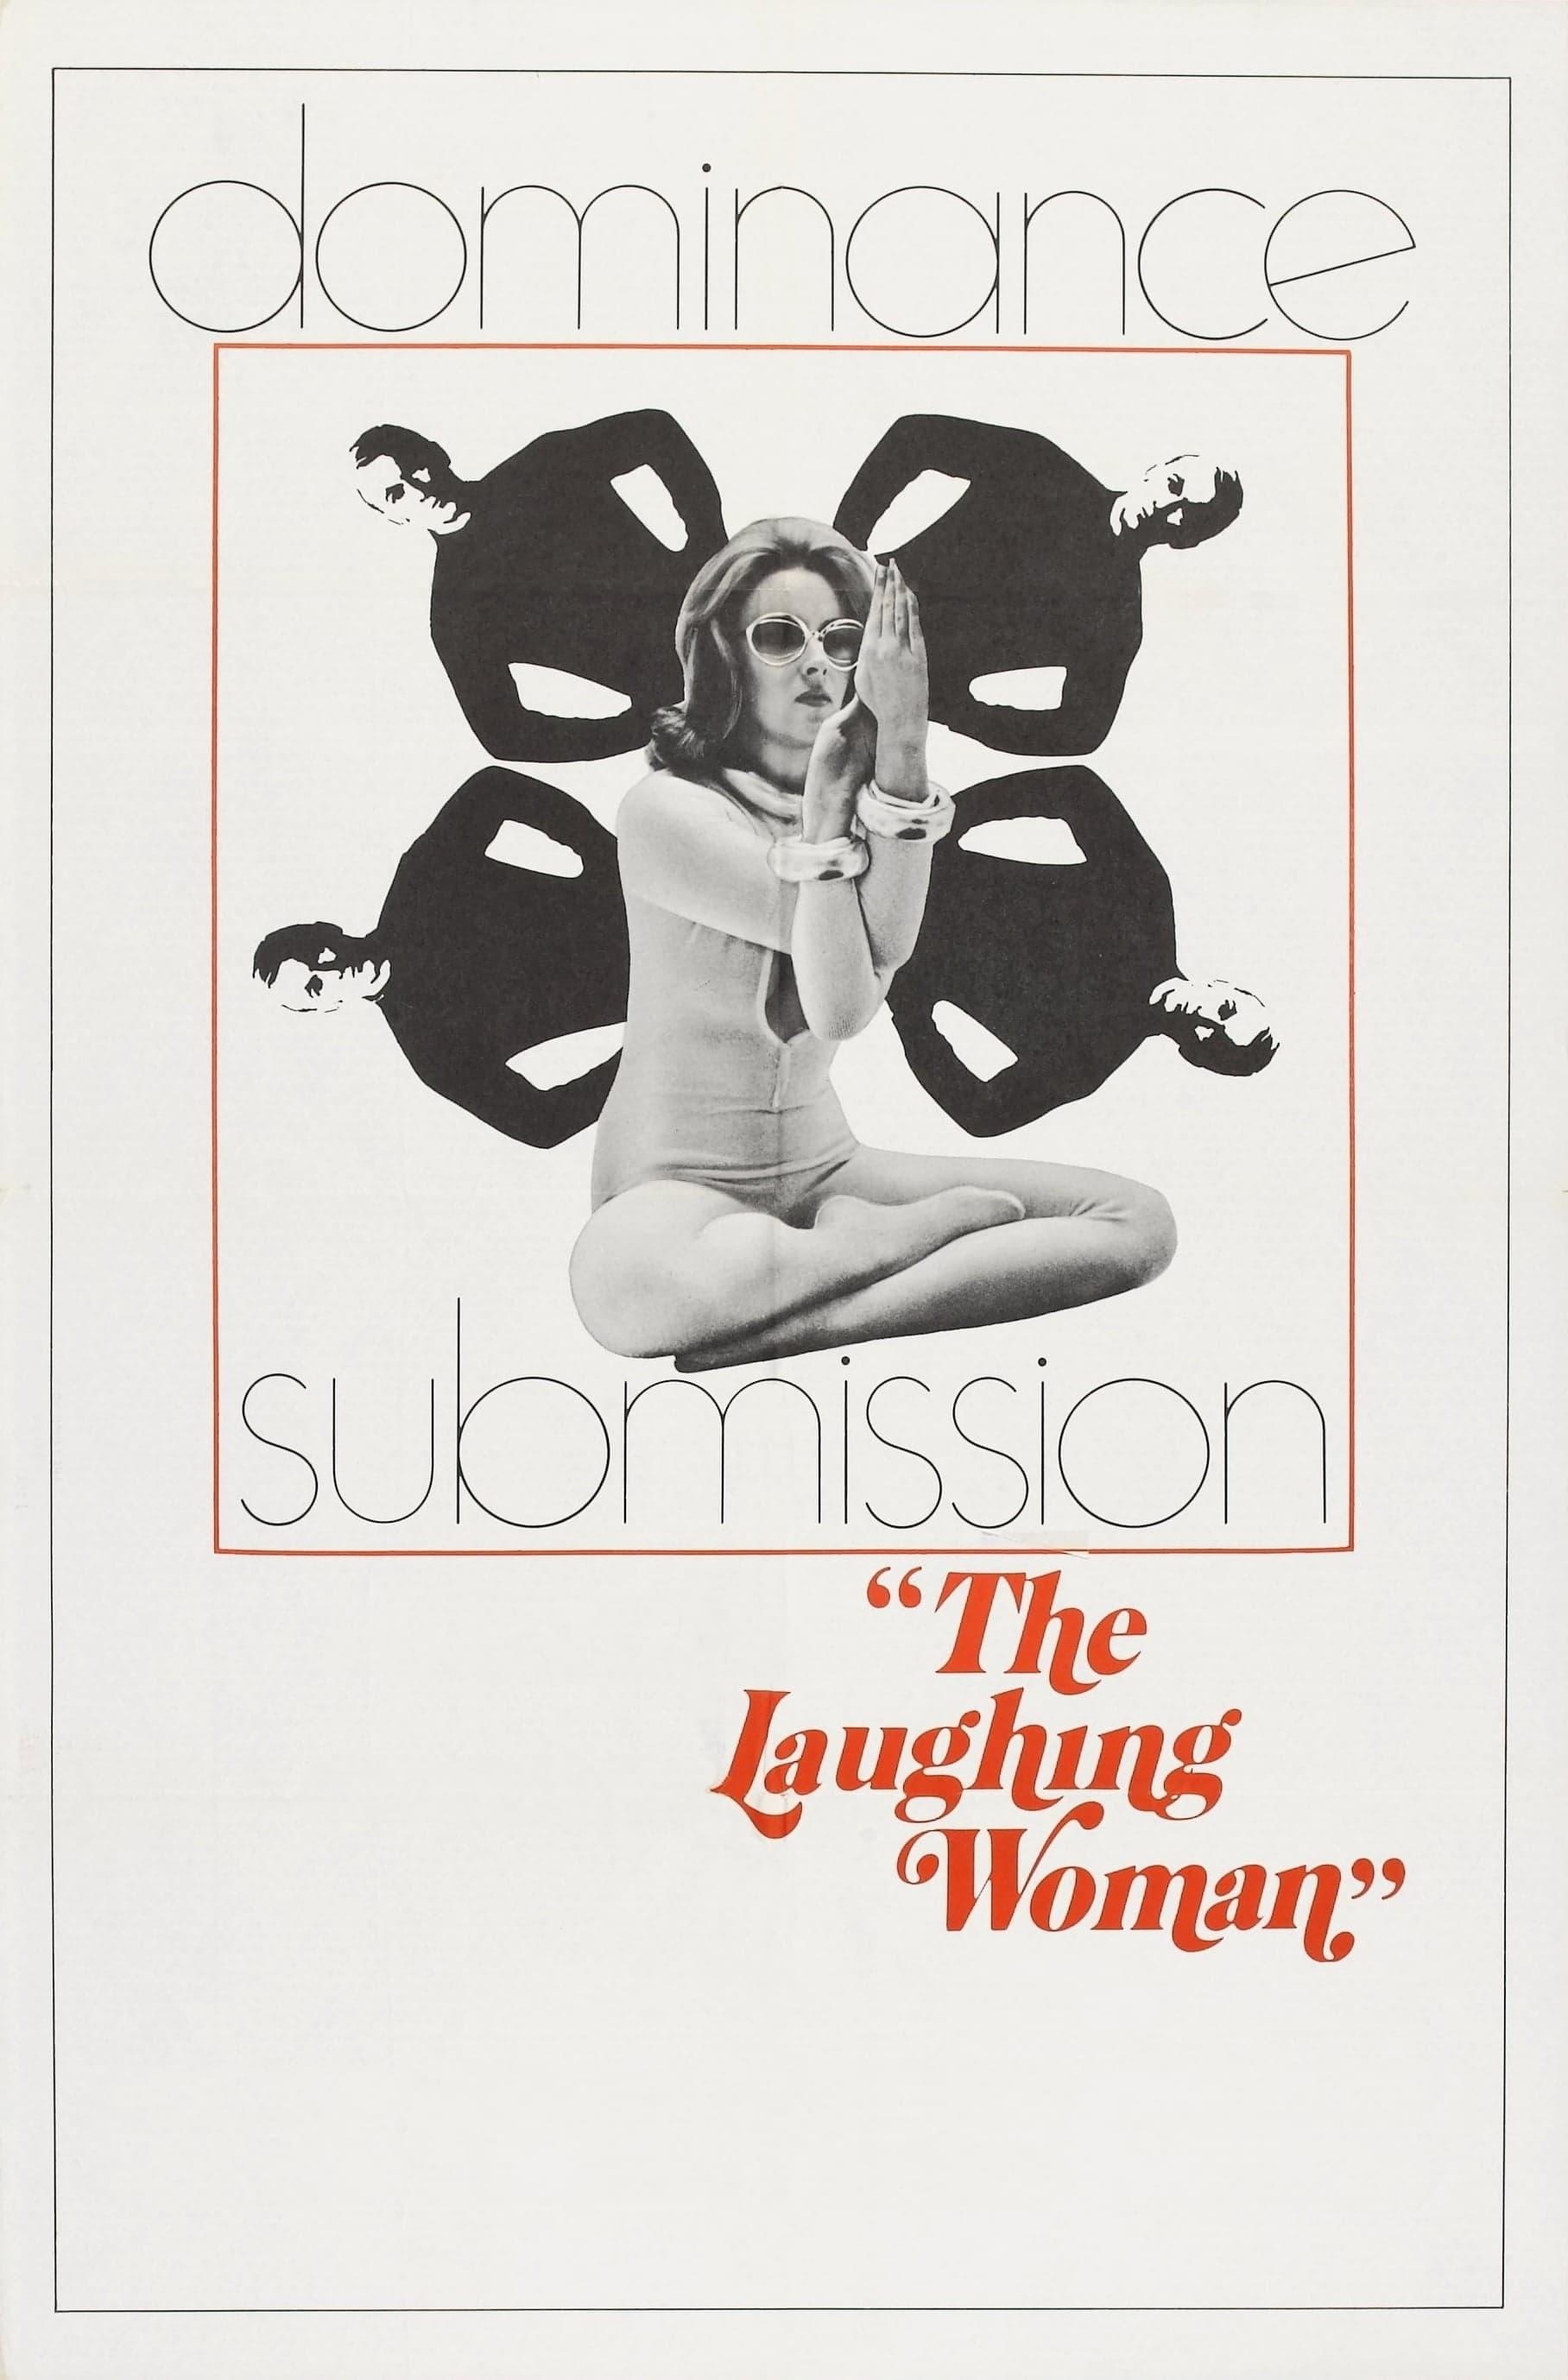 The Laughing Woman poster